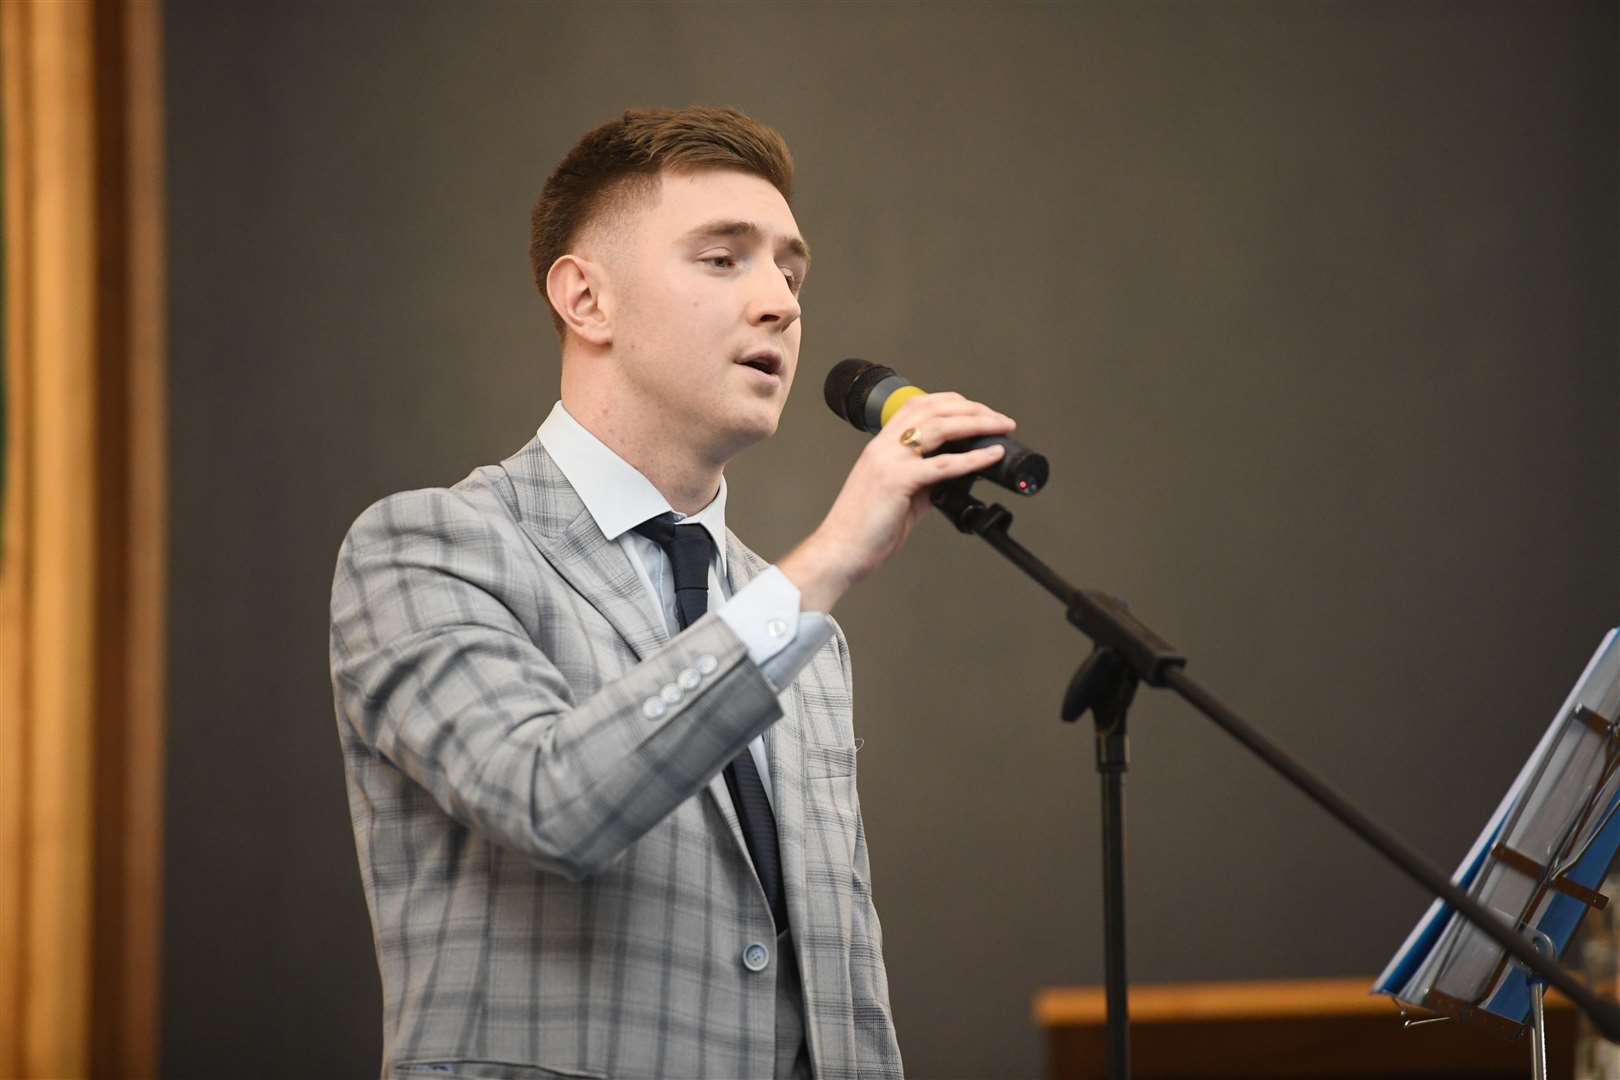 Jason McClurg performed his music at a concert and also raised funds for Crossroads Carers and the renal unit at Raigmore Hospital. Picture: James Mackenzie.